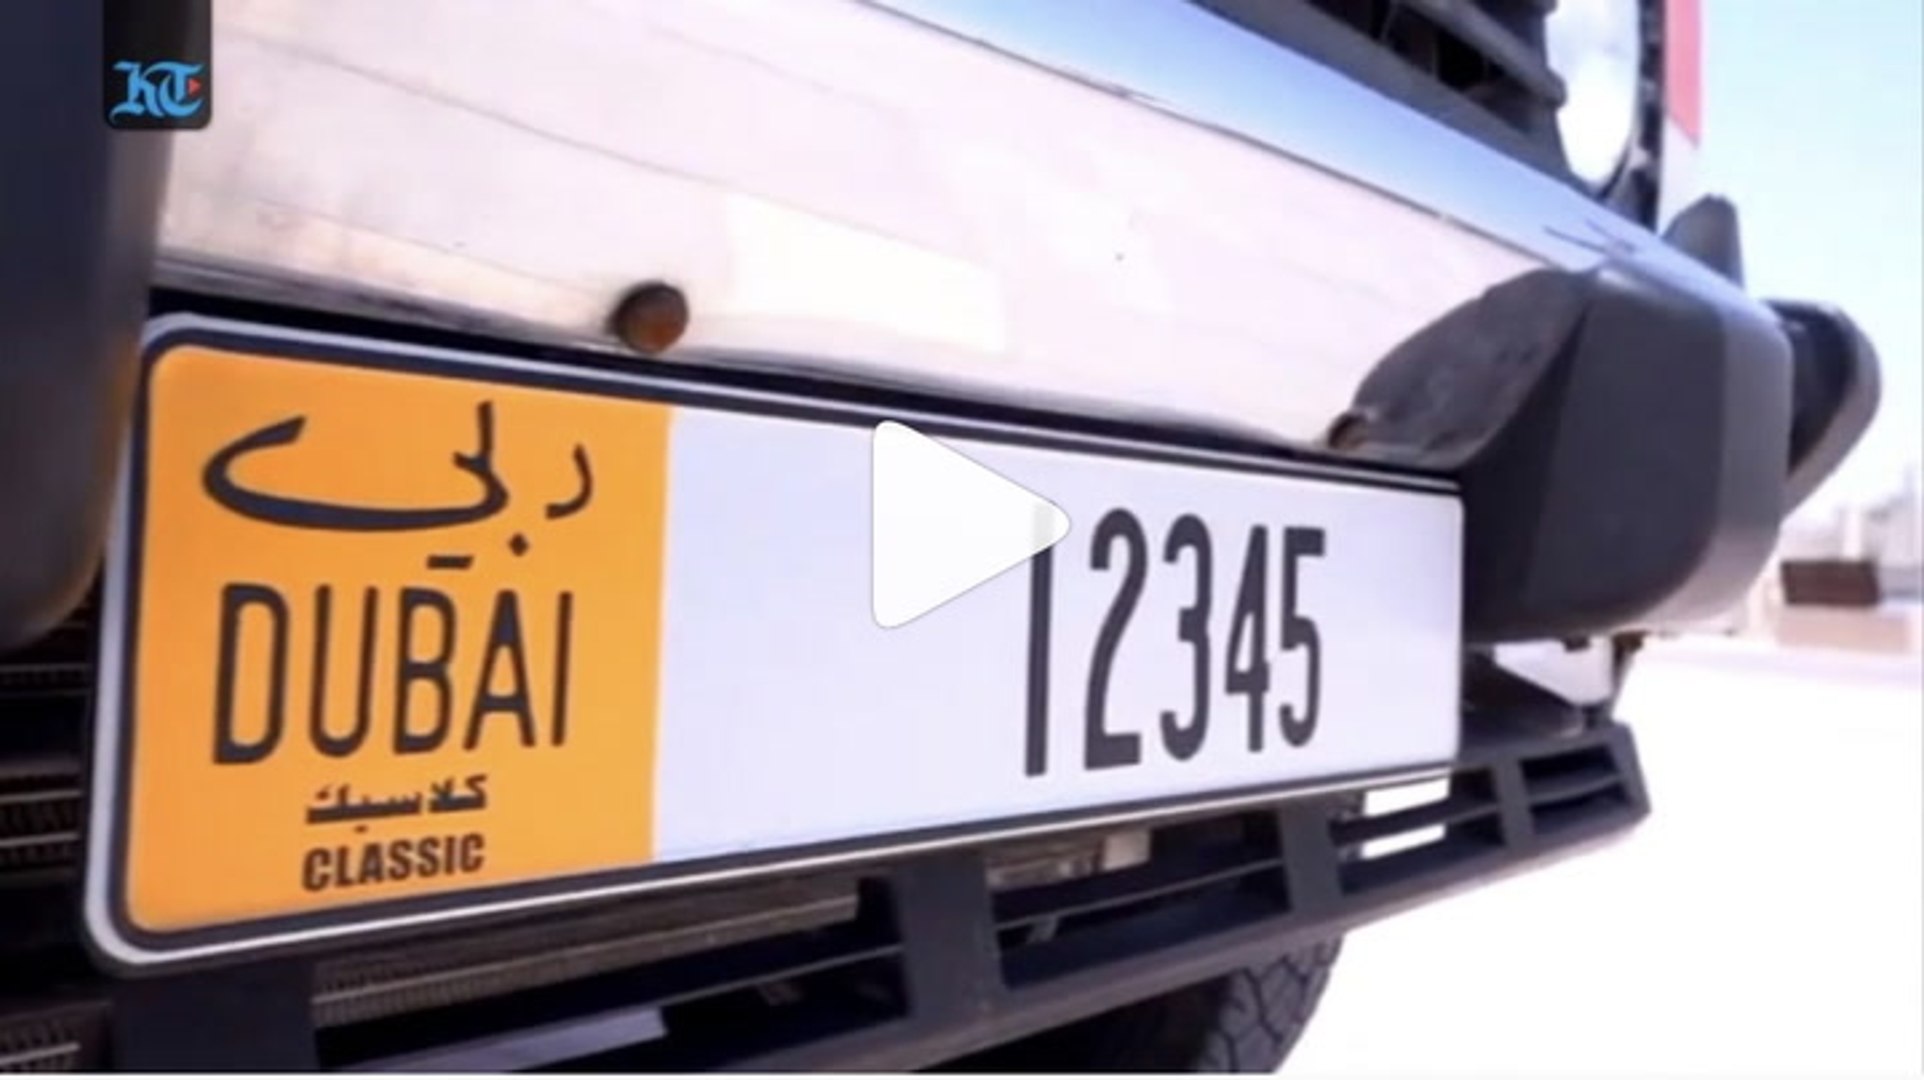 Dubai introduces a new design for classic vehicle licence plates - video  Dailymotion